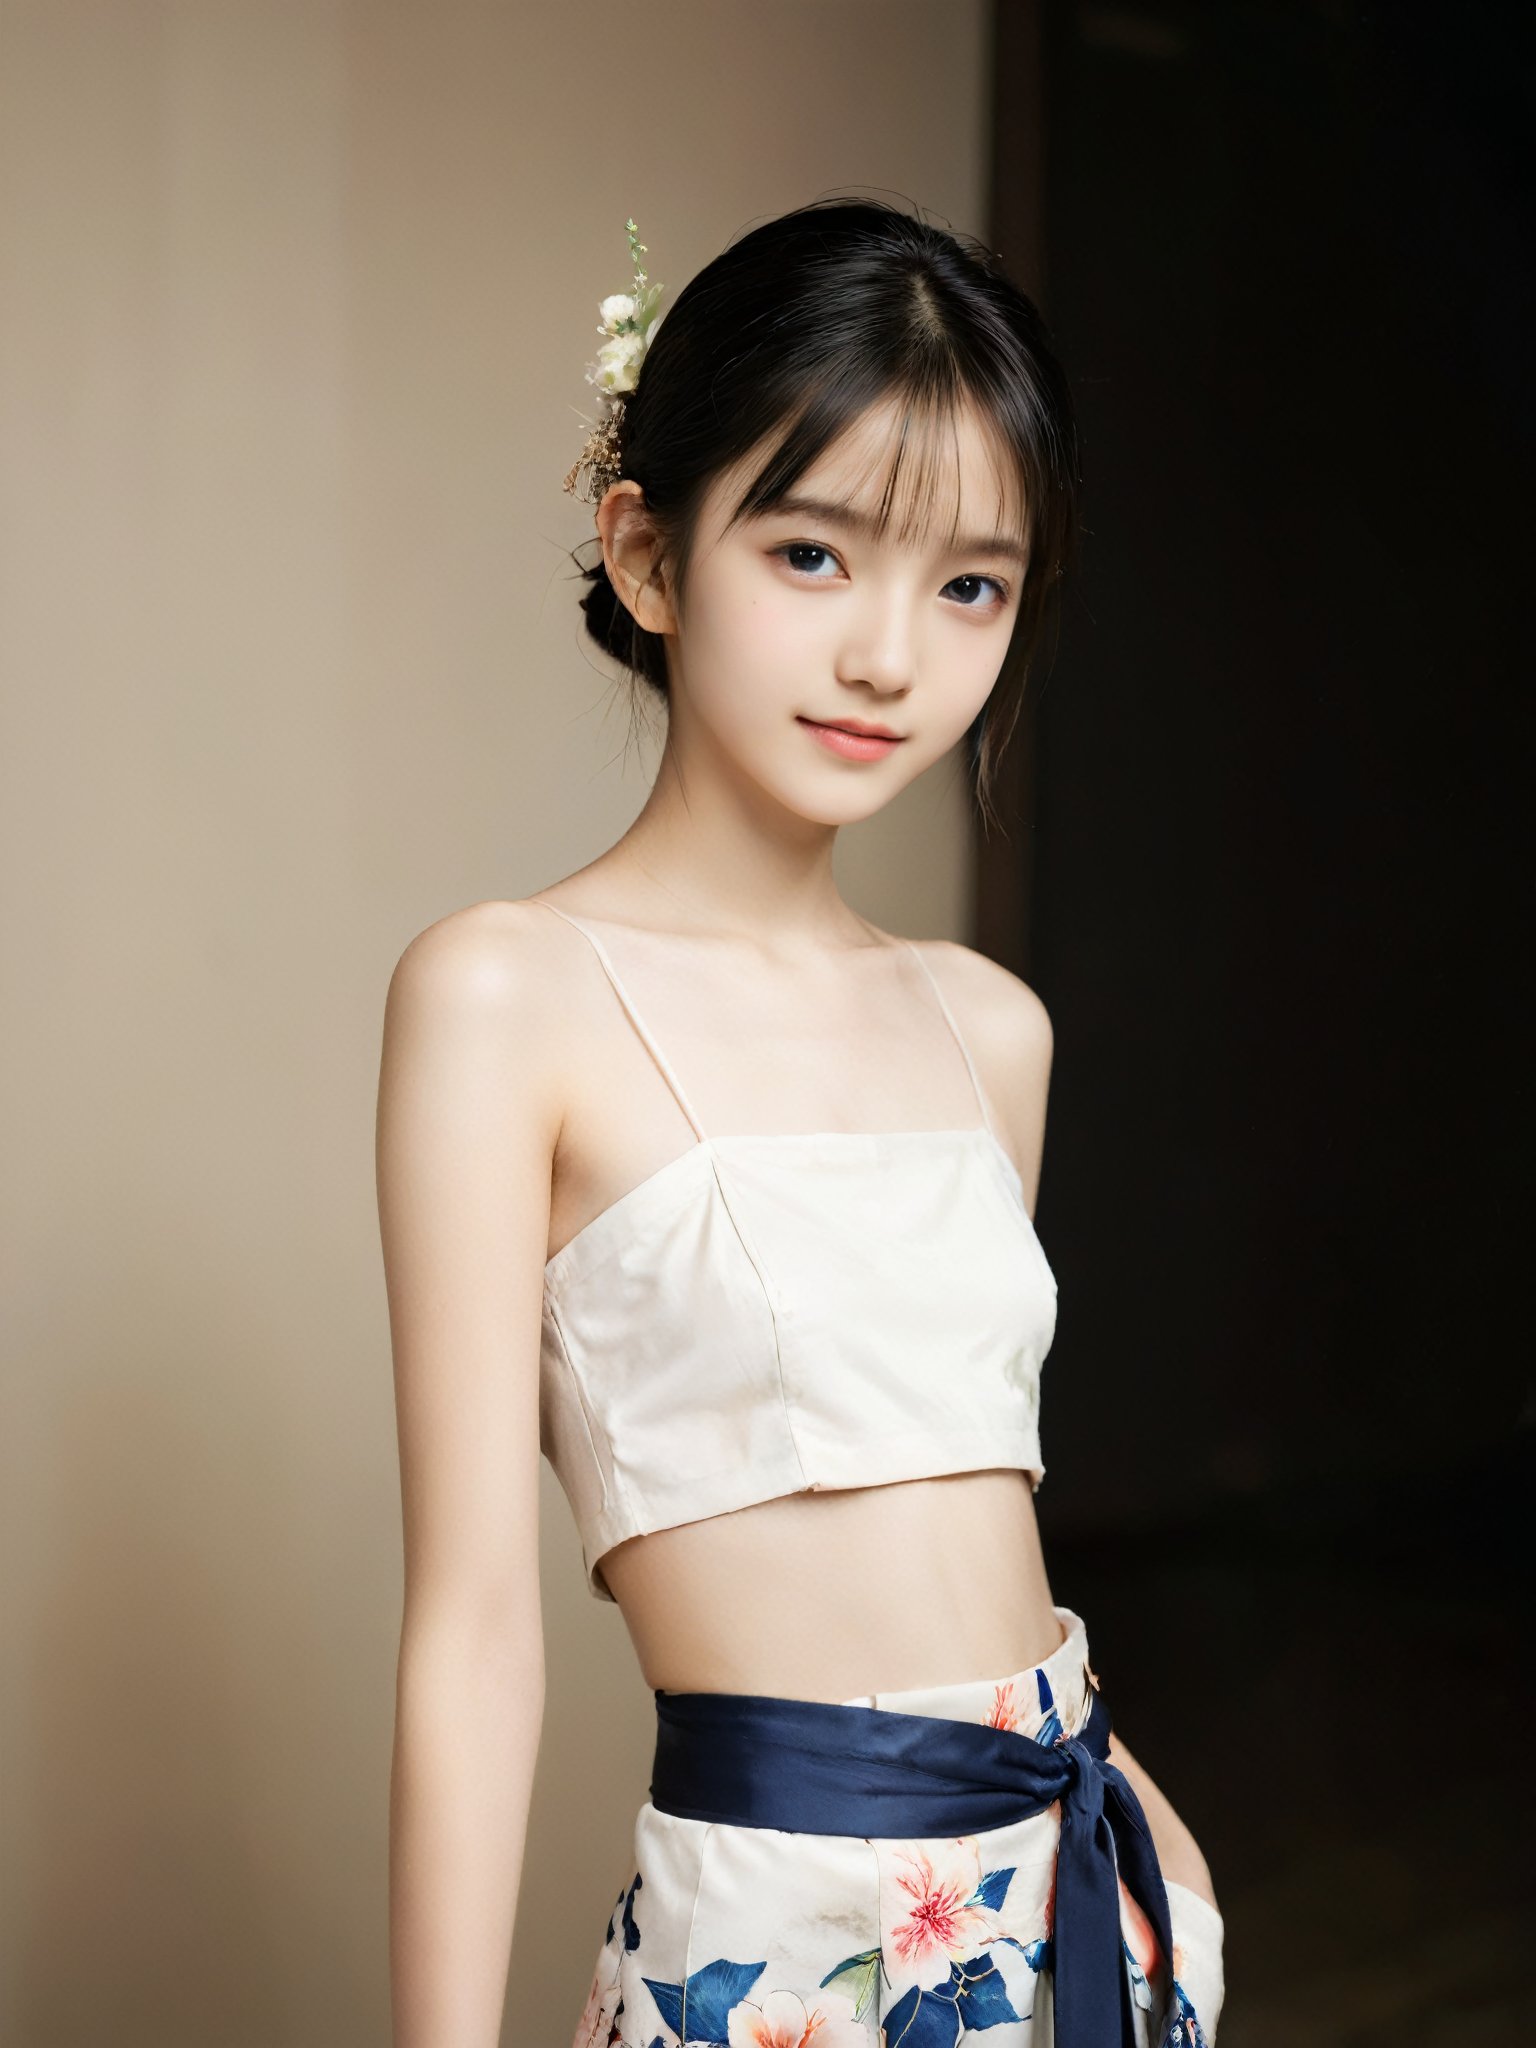 A photorealistic analog portrait of a young fashion model. (age 13-15, preteen girl, pretty girl:1.8). (nude, naked body, no public hair:1.6), (slender girl, skinny body, very thin, immature body:1.3), She has a gentle smile, light makeup, and is (wearing an erotic dark yukata:1.3). (beautiful hairstyle, black hair, bob haircut:1.2), (high heels, runway walking, dancing:0.8),(midriff, navel, bare shoulders, bare breasts:1.7), The background is soft-focused with a neutral color palette, emphasizing the subject. The lighting is soft and diffused, highlighting her features and giving the image a warm, inviting atmosphere. (blank background, deserted place:1.7)

More Reasonable Details,aesthetic portrait,FilmGirl,hubggirl,more detail XL,More Reasonable Details